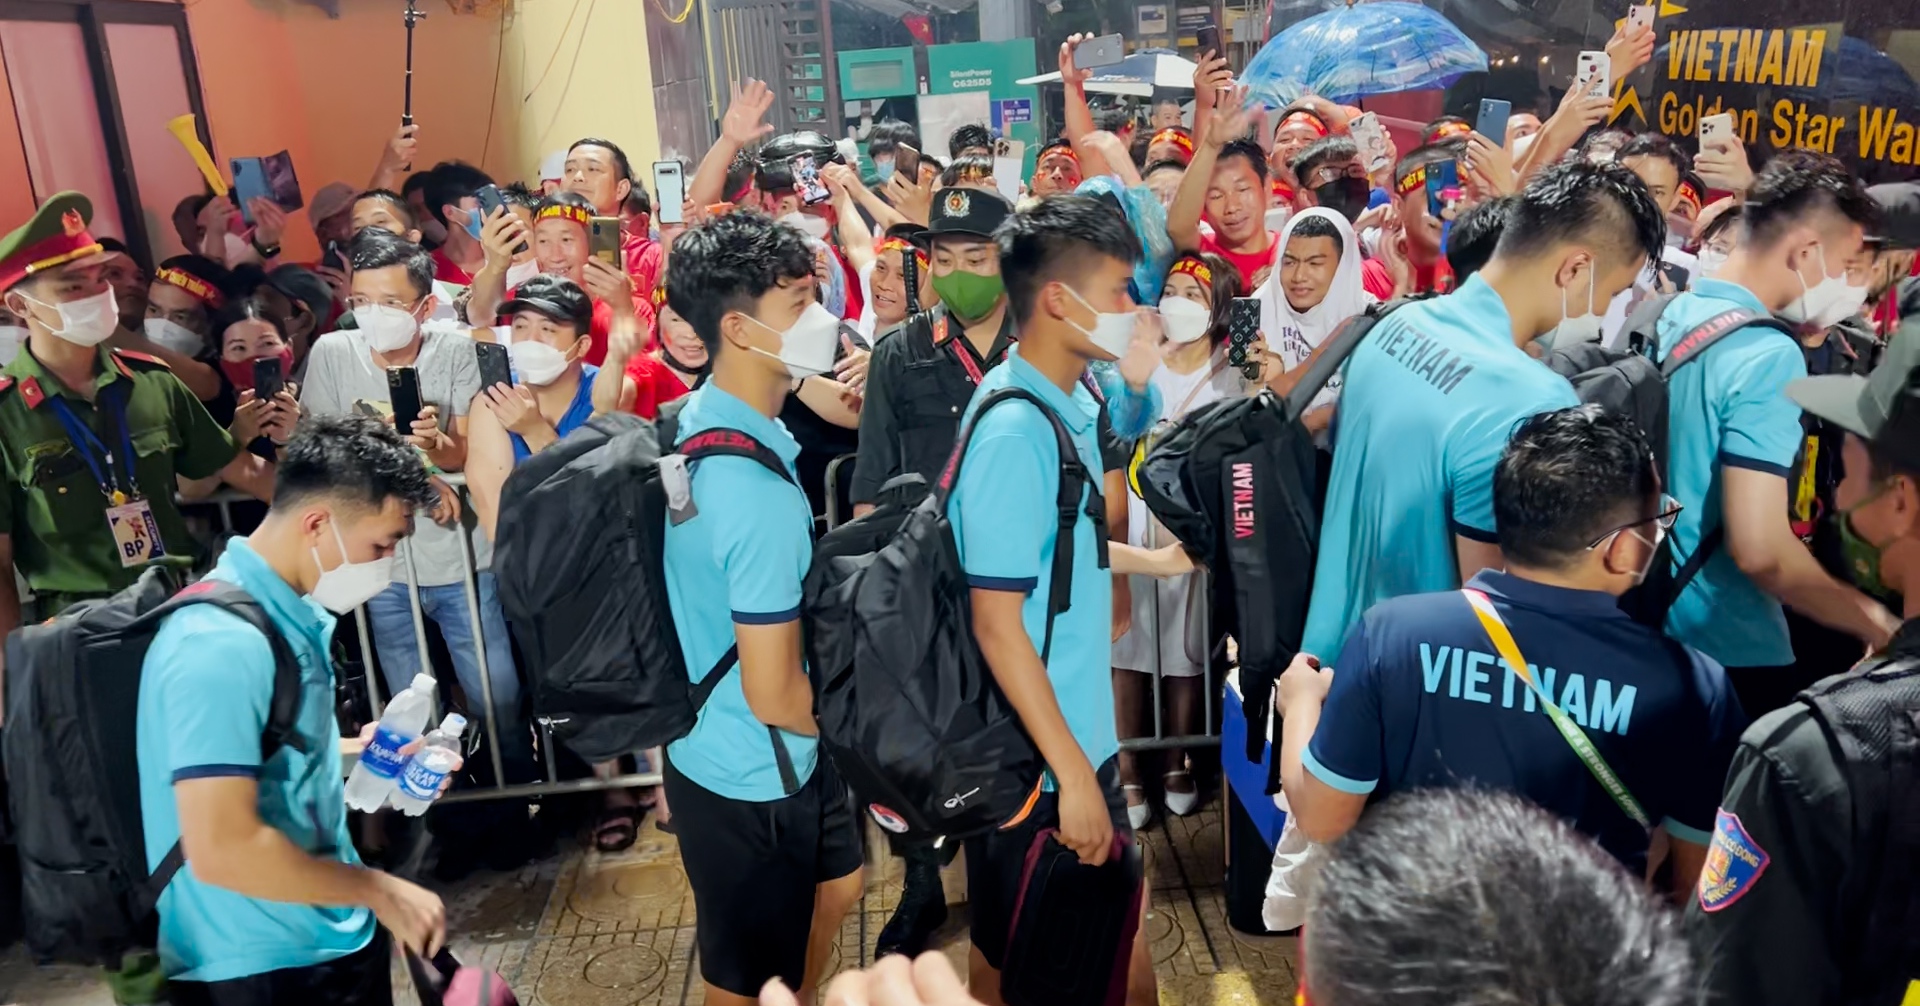 U23 Vietnam was surrounded by a “sea” of fans at Viet Tri Stadium